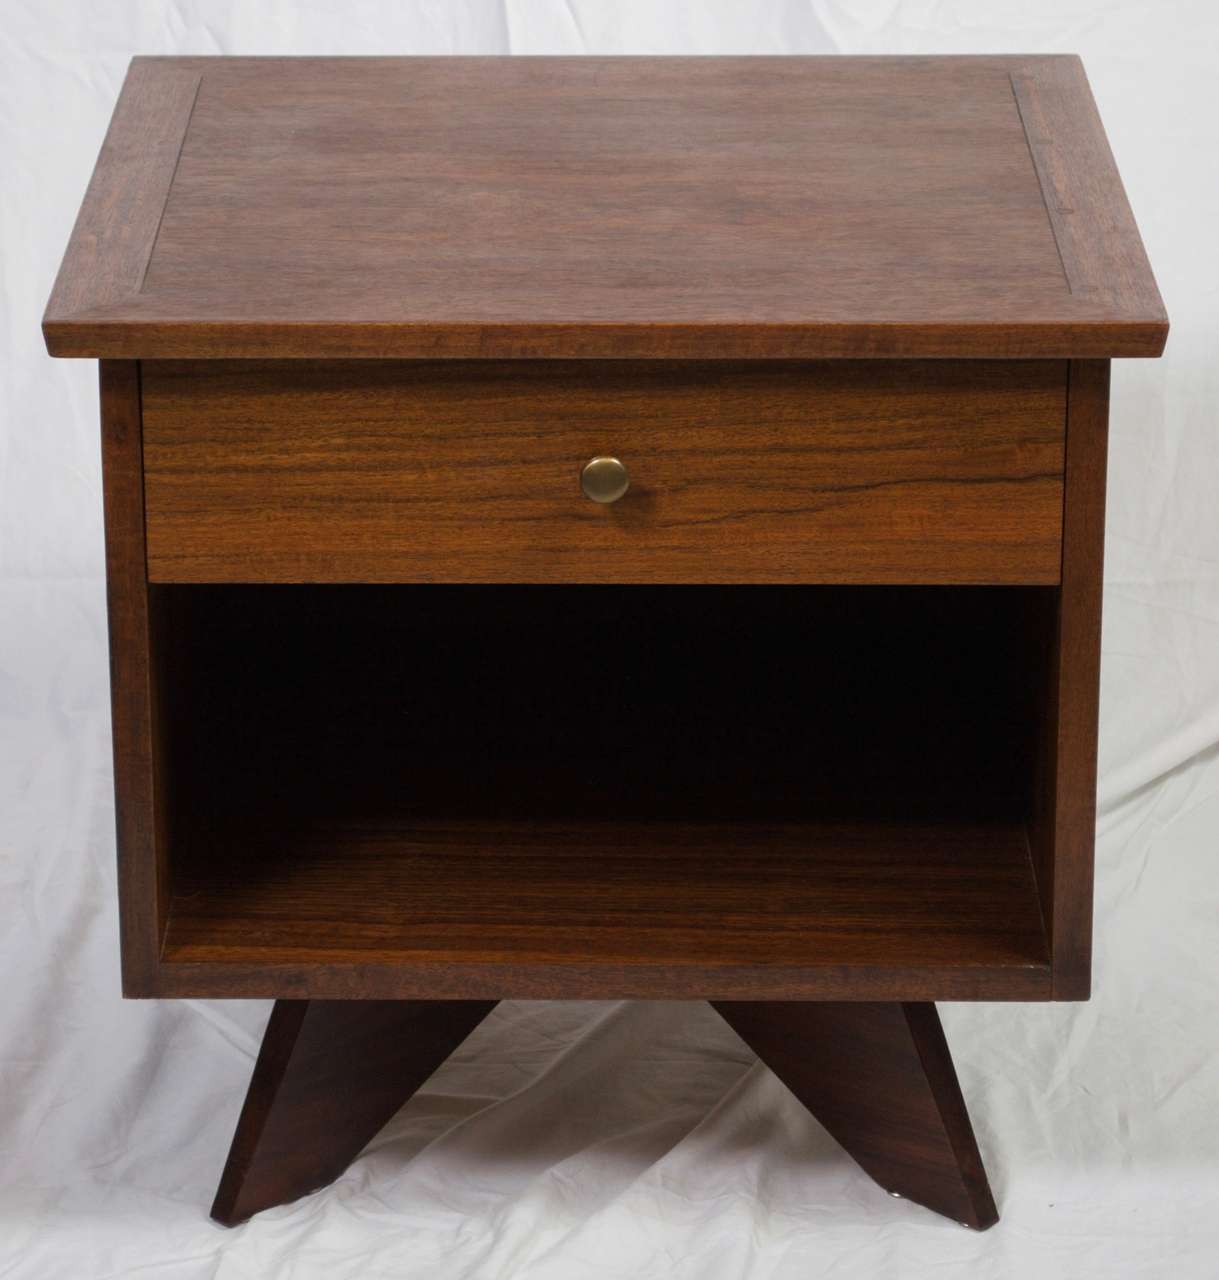 c.1950's nightstand designed by George Nakashima, part of his 